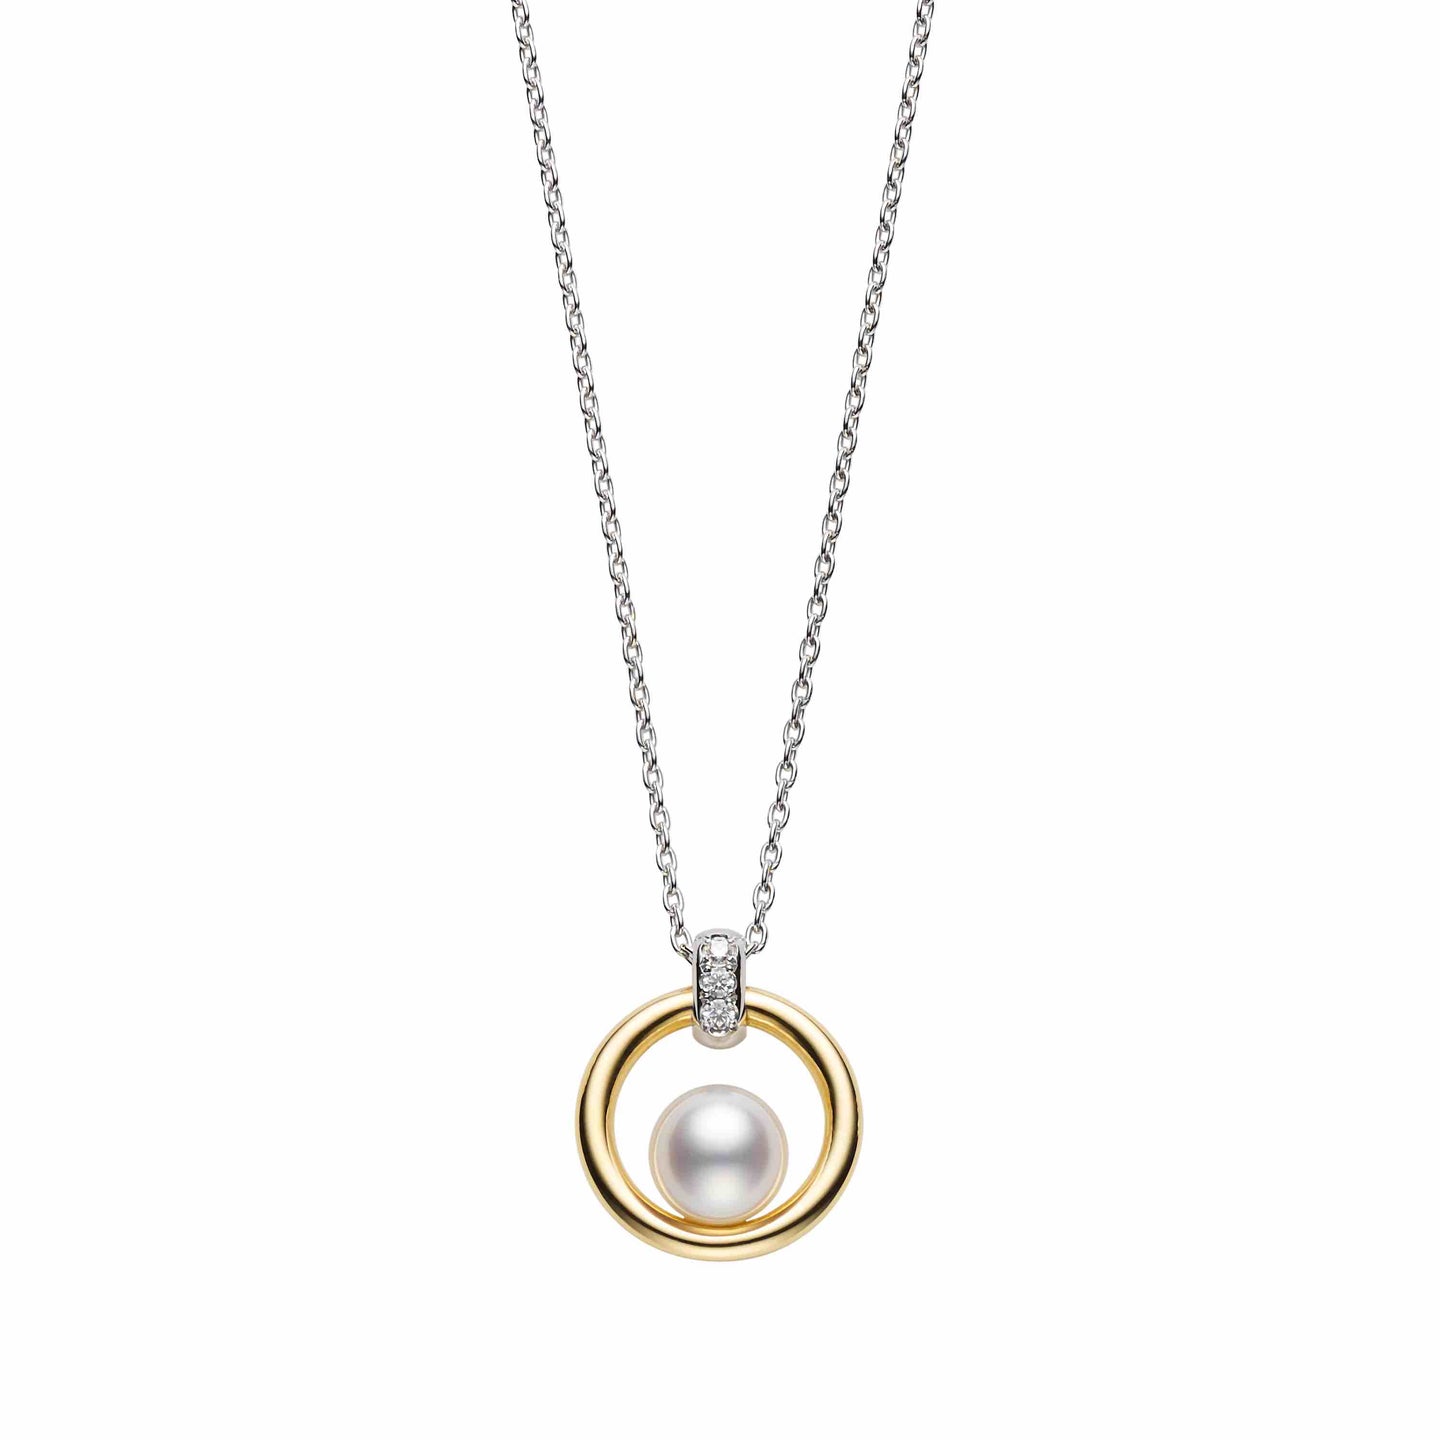 Mikimoto 18K White Gold Necklace with Akoya Pearl and Diamonds